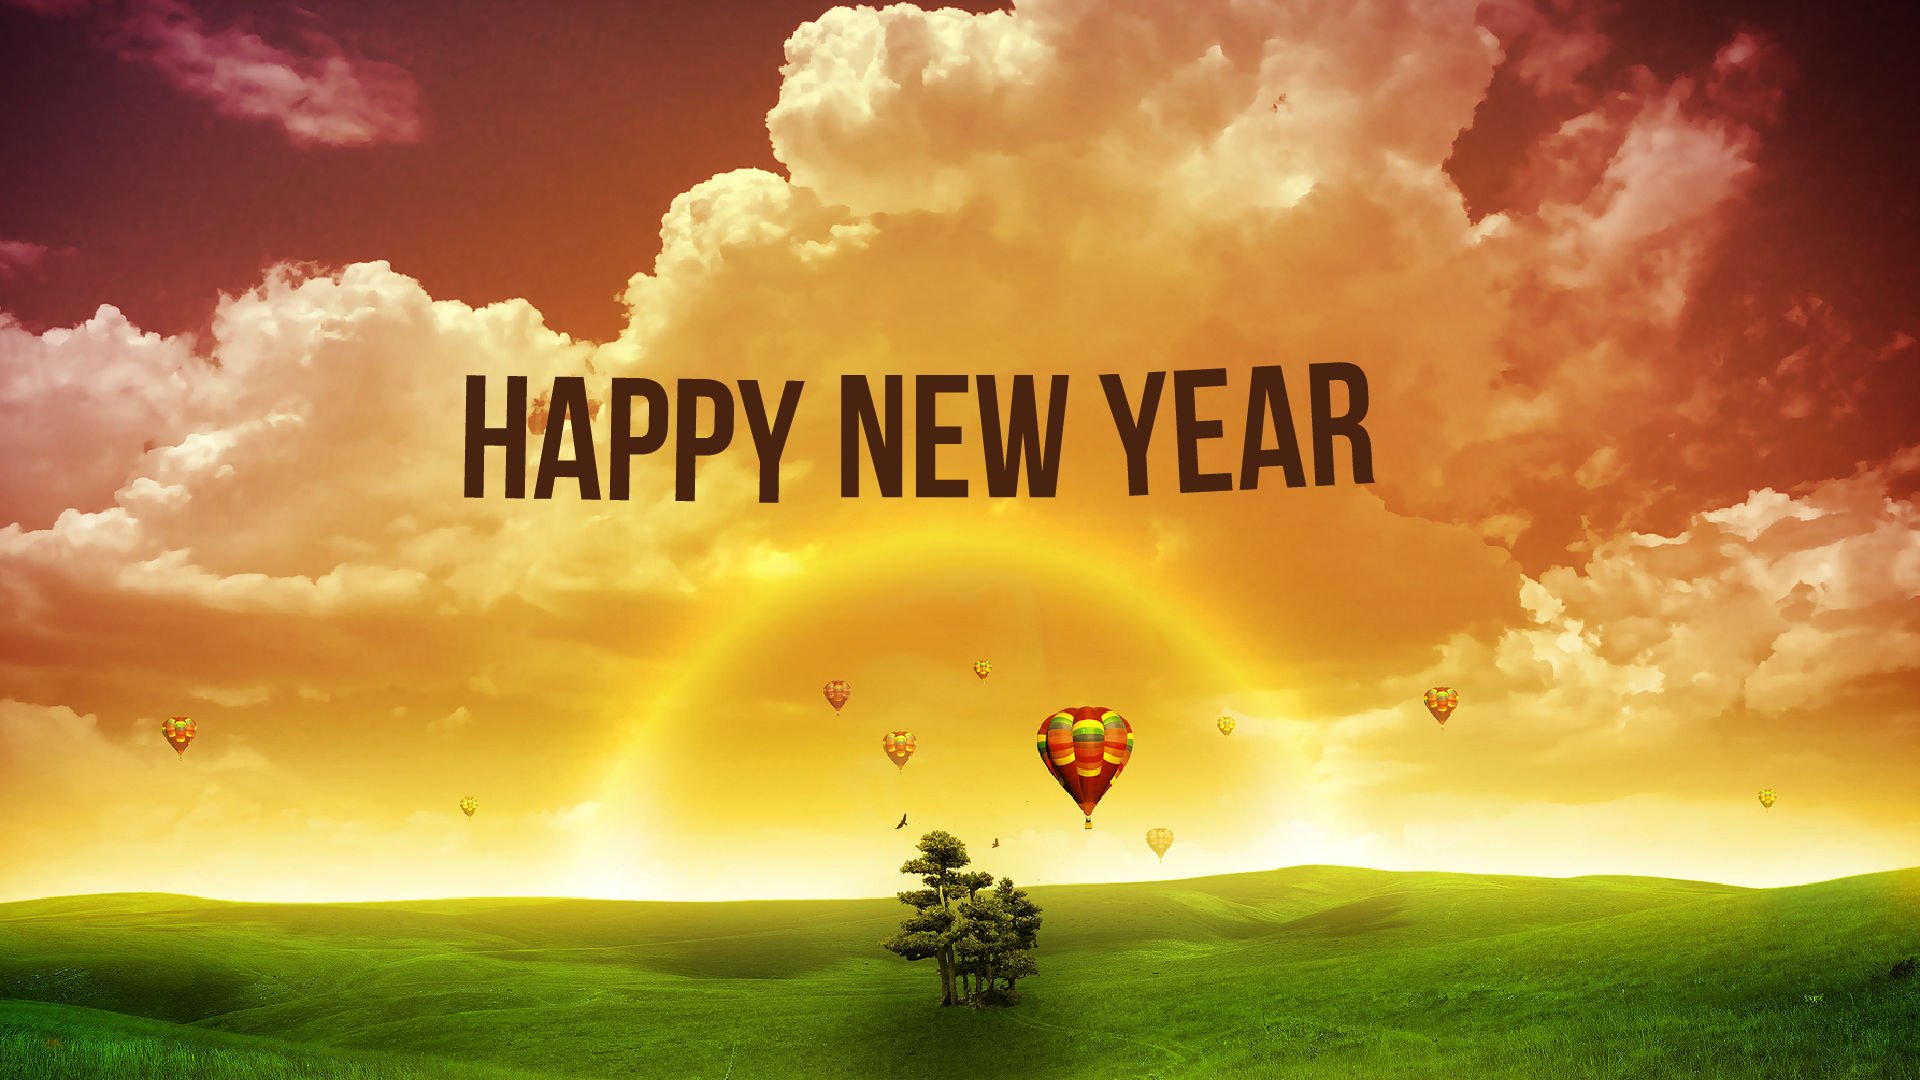 Happy new year 2016 HD wallpapers Images Pictures